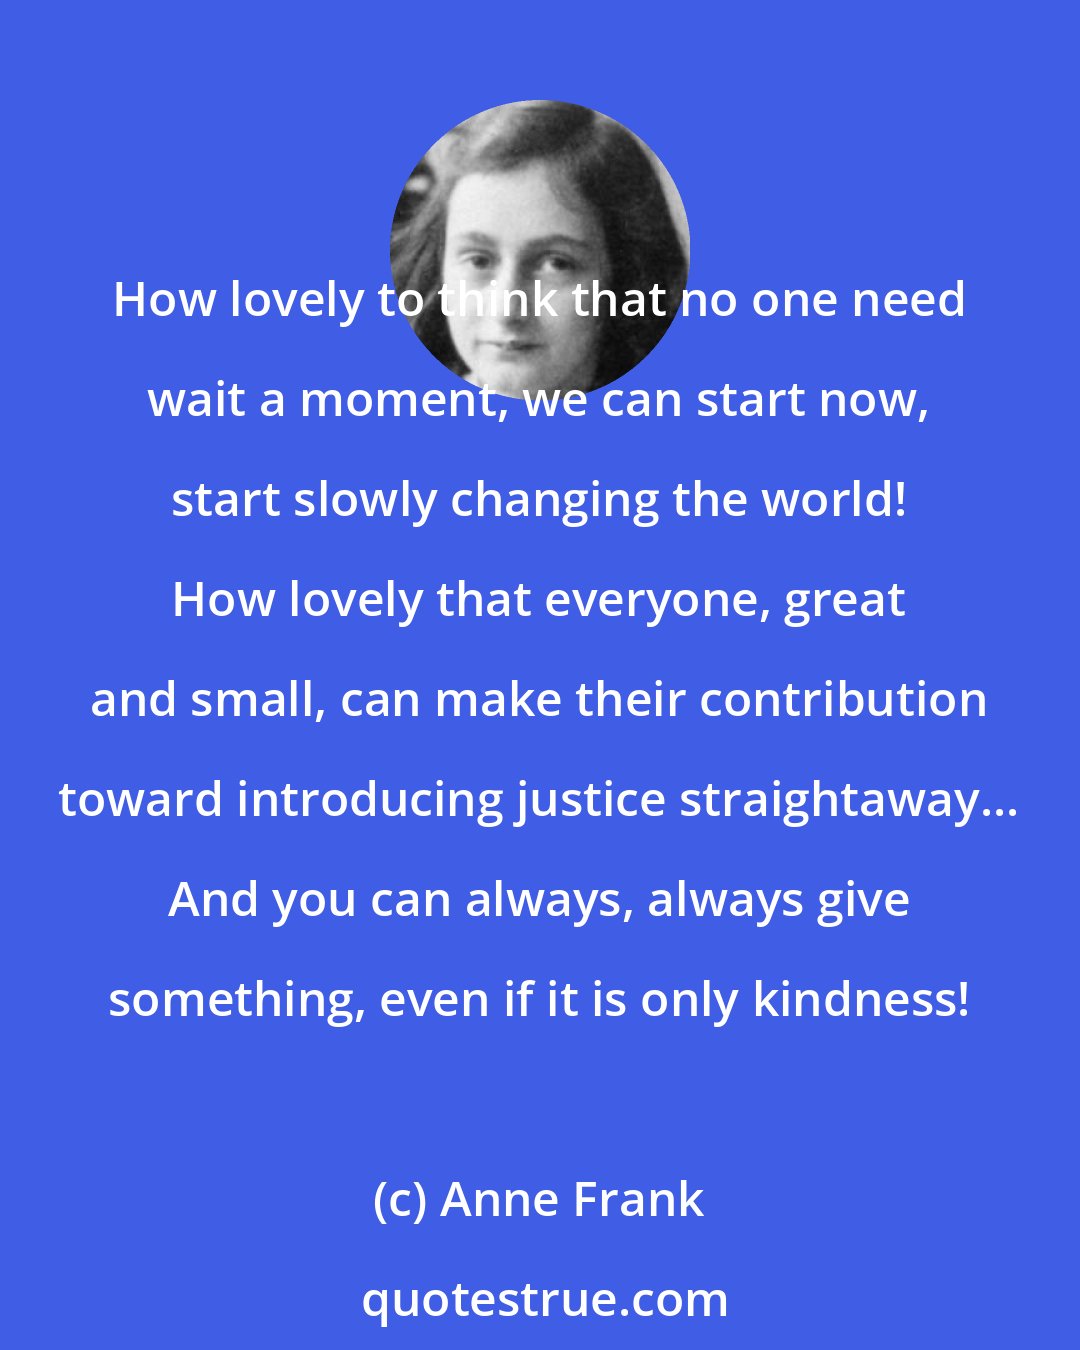 Anne Frank: How lovely to think that no one need wait a moment, we can start now, start slowly changing the world! How lovely that everyone, great and small, can make their contribution toward introducing justice straightaway... And you can always, always give something, even if it is only kindness!